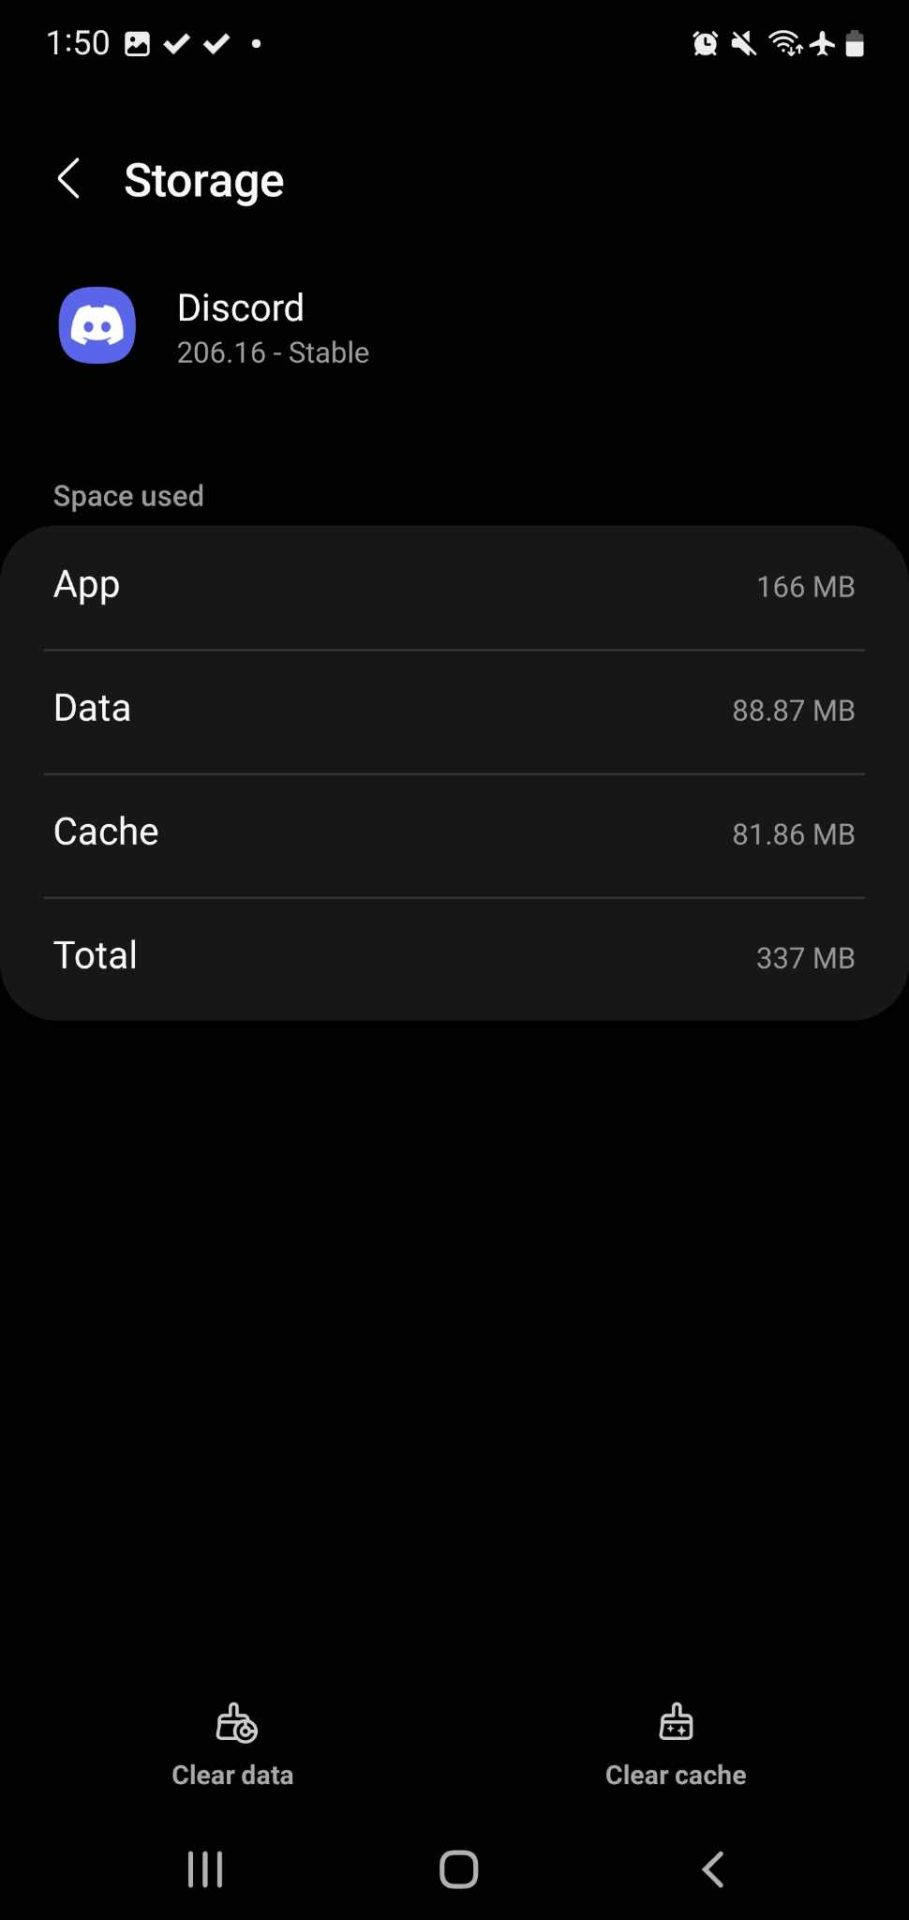 Clear cache option on Android